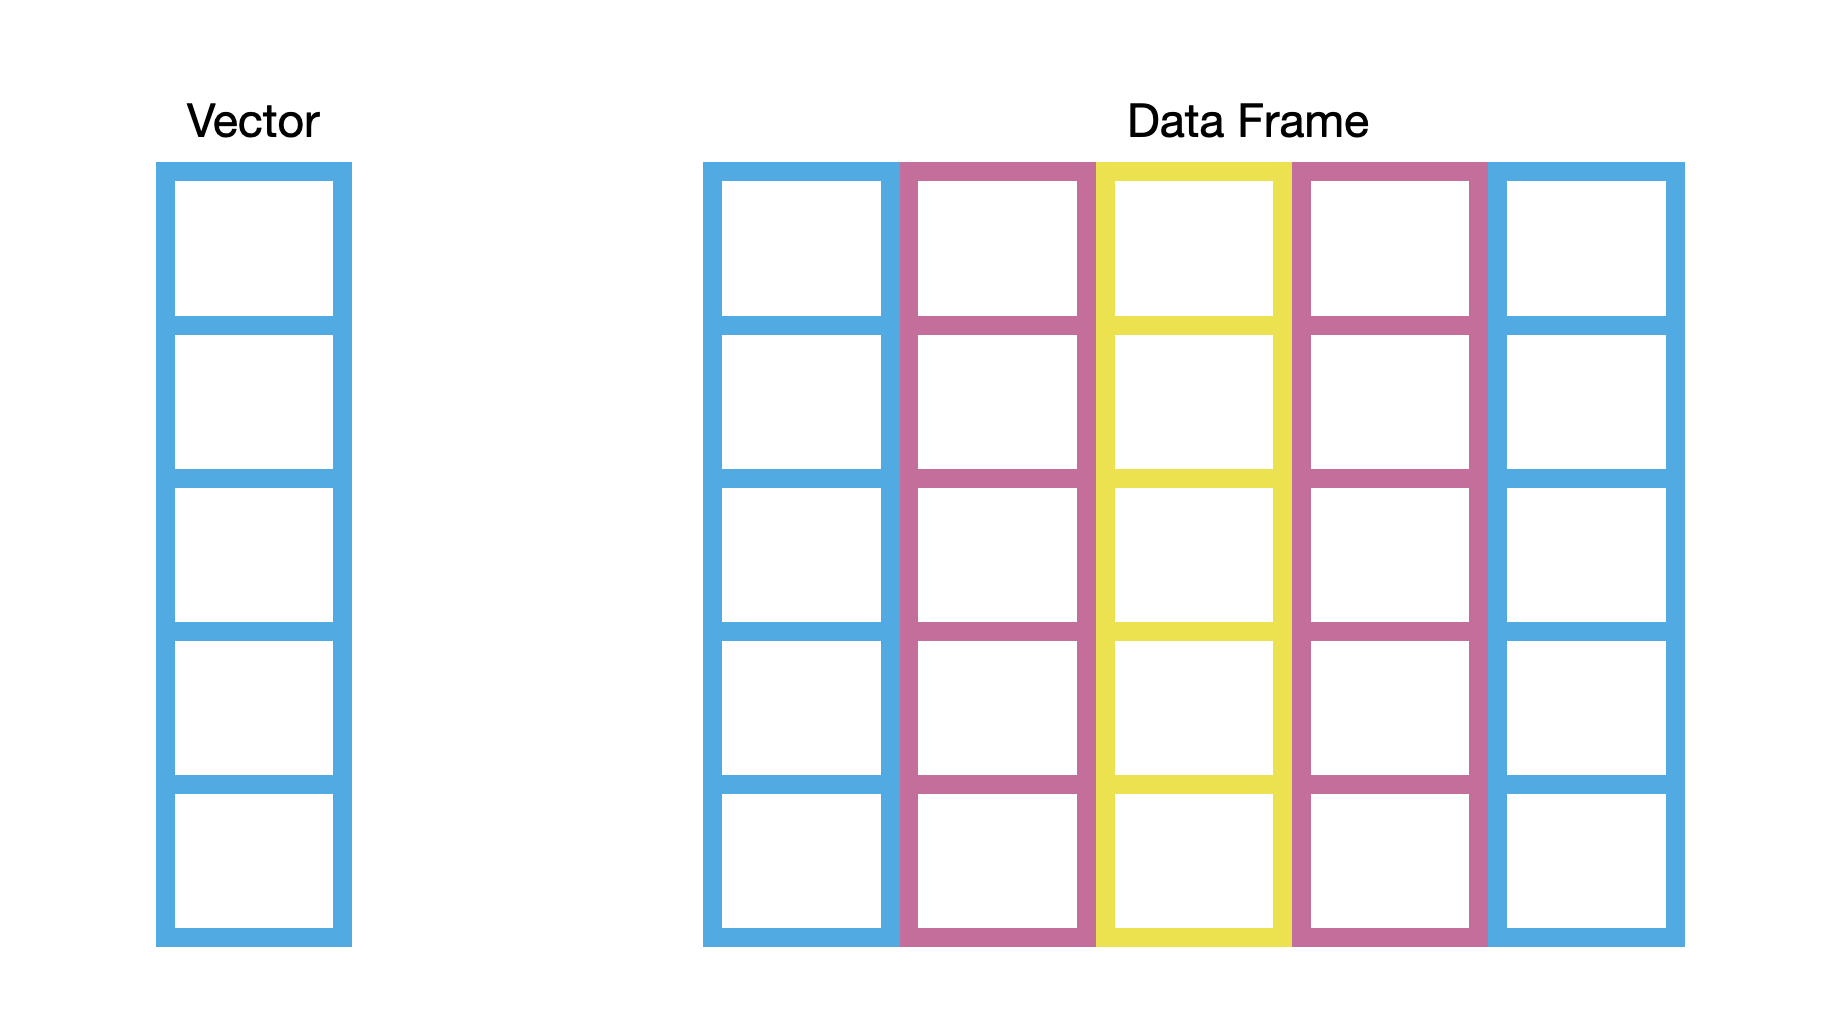 LEFT: A visual mnemonic for a vector is a single-column bookcase. RIGHT: A visual mnemonic for a data frame is a multi-column bookcase.